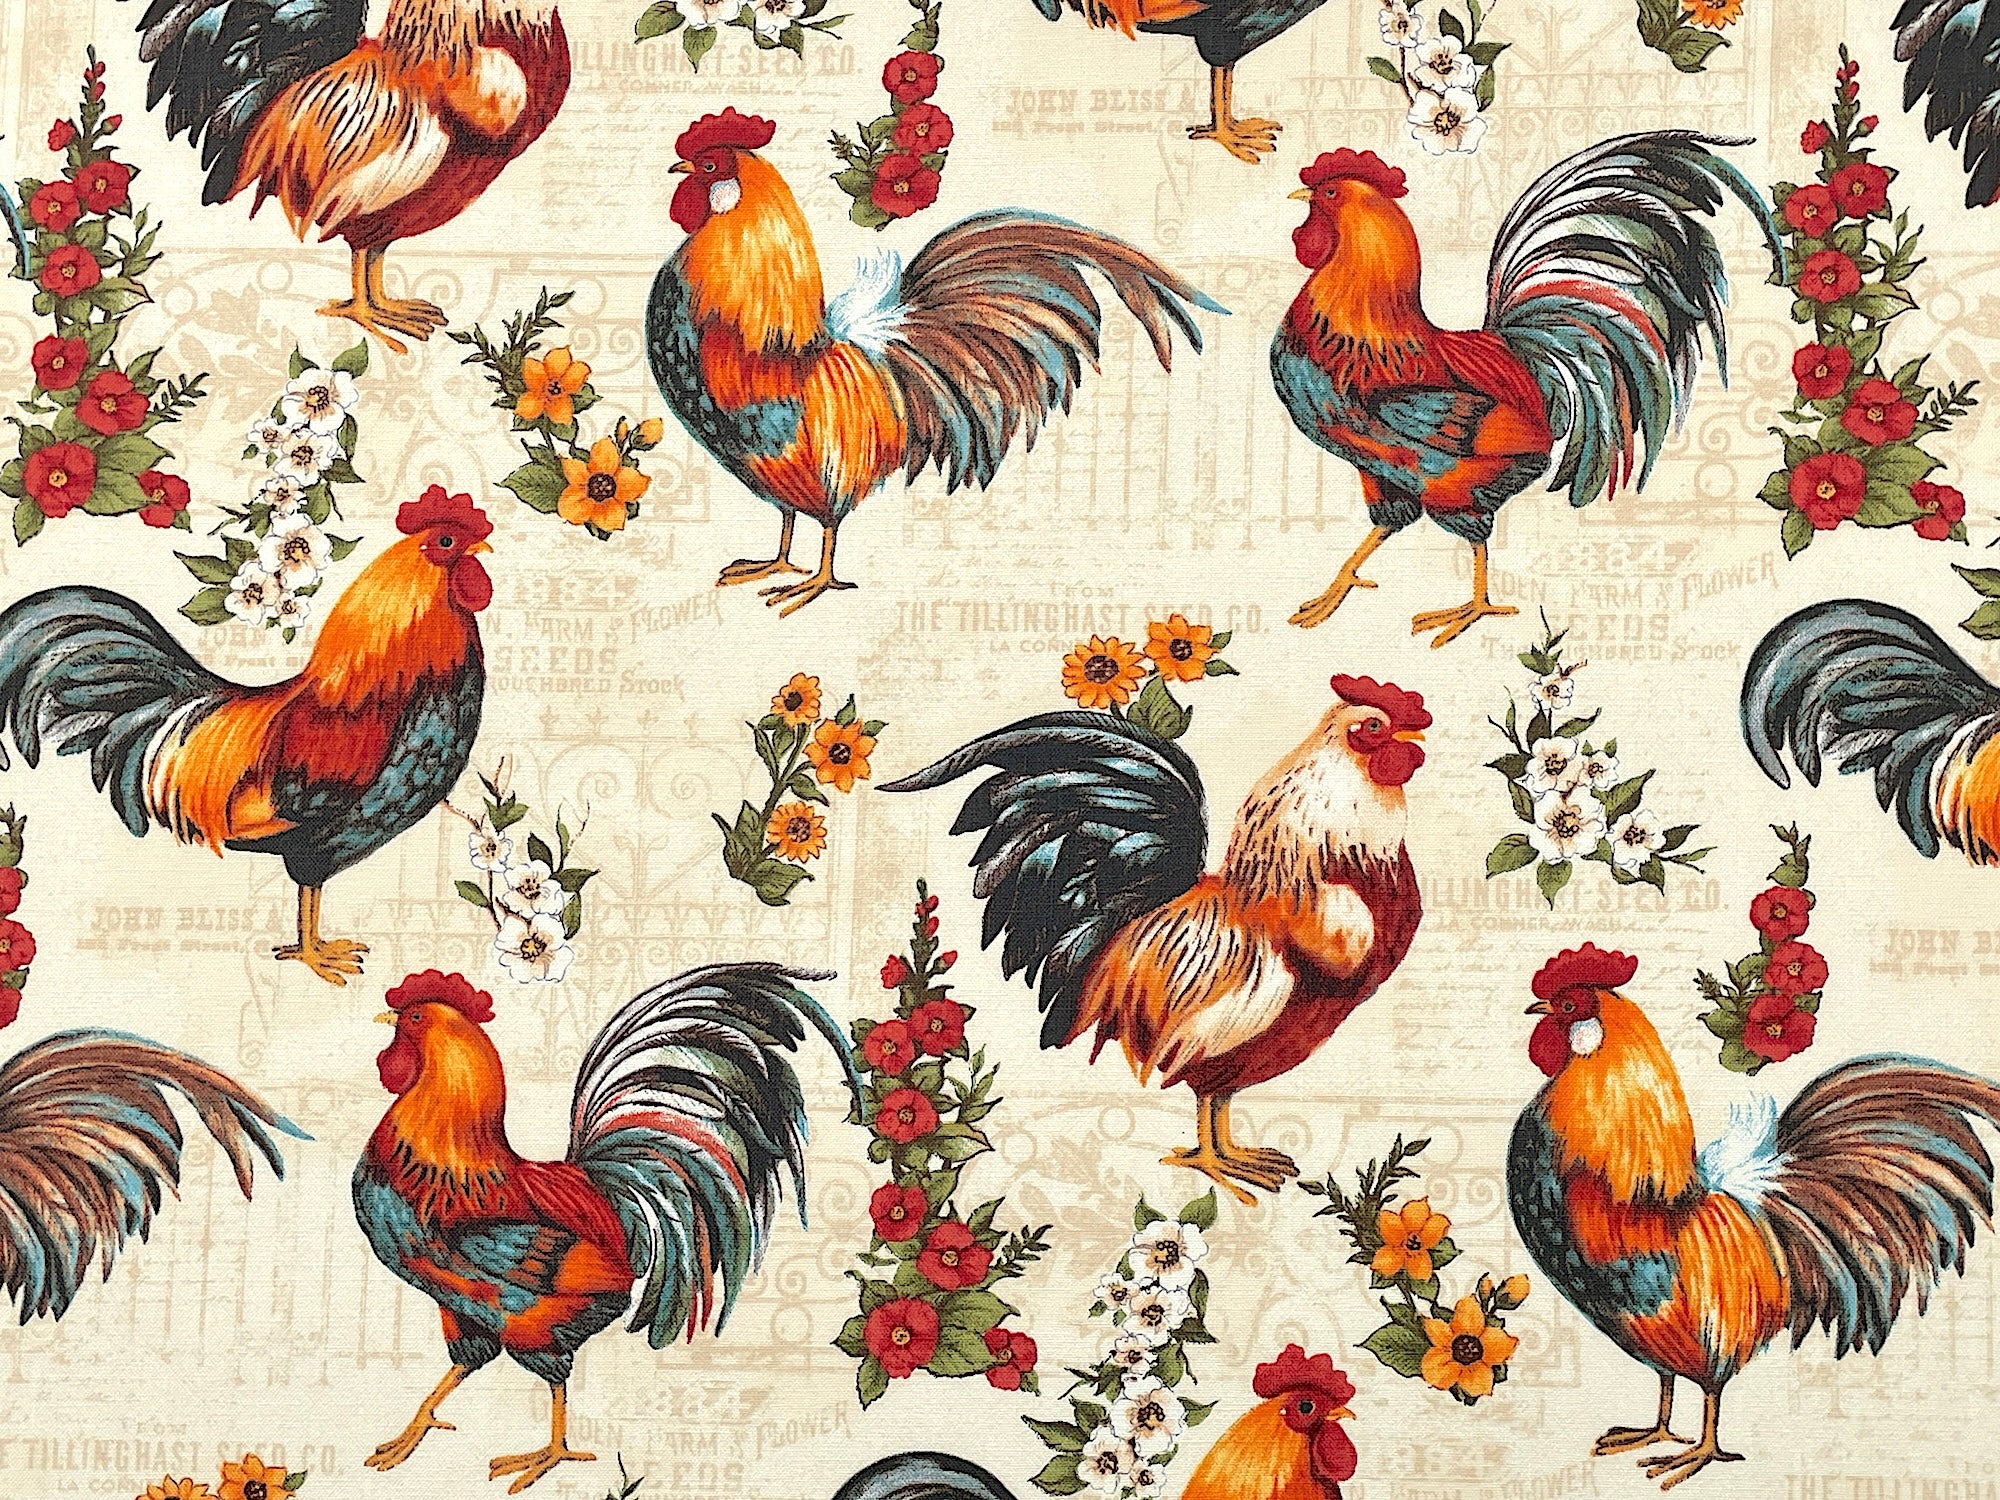 Cream colored cotton fabric covered with roosters and flowers.